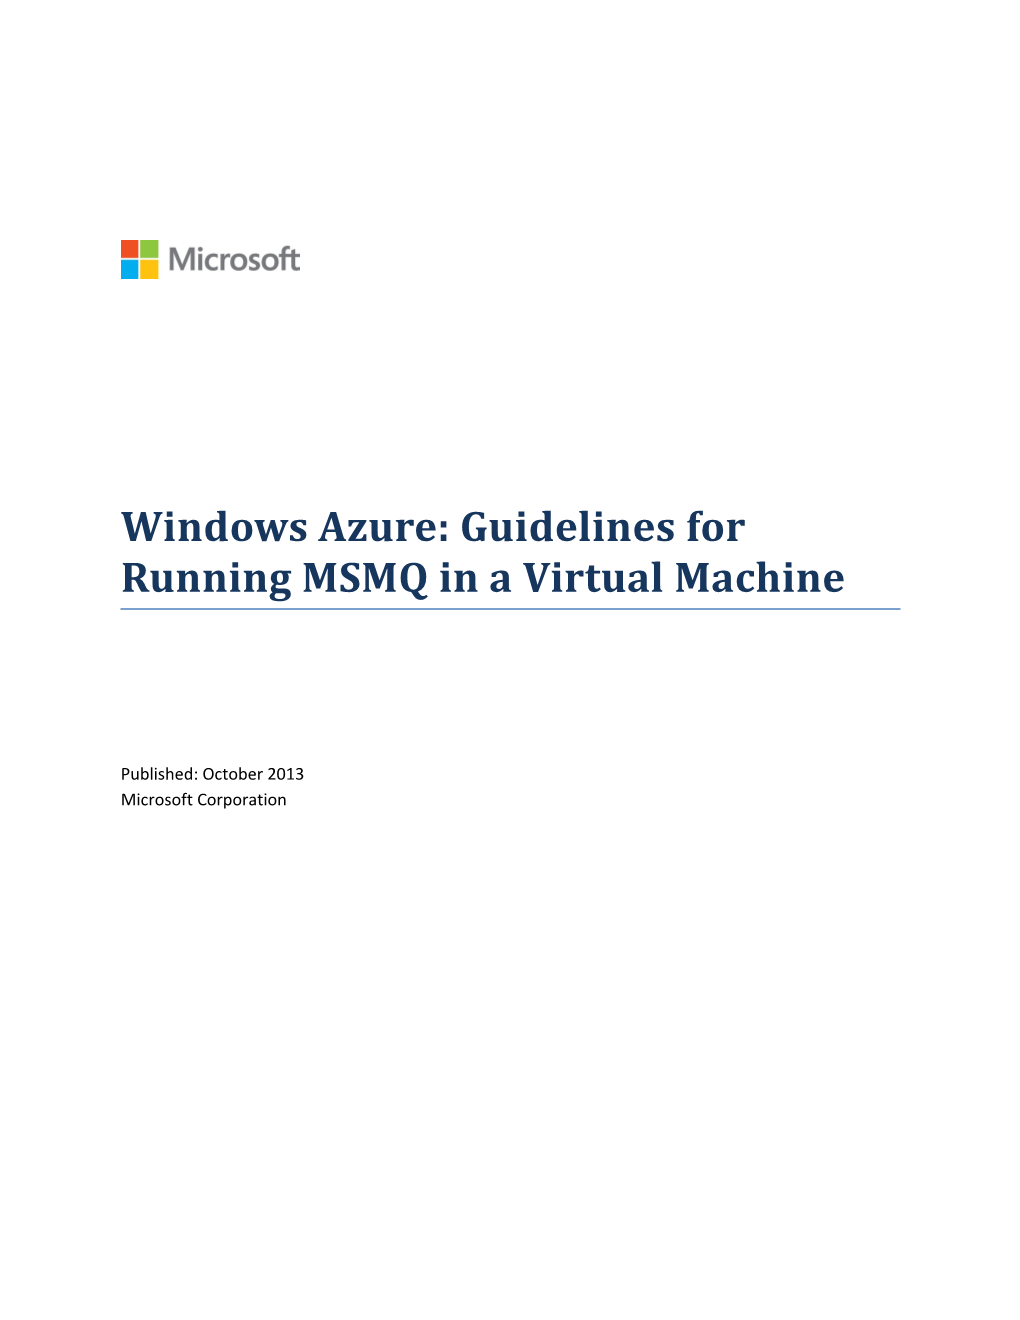 Windows Azure: Guidelines for Running MSMQ in a Virtual Machine